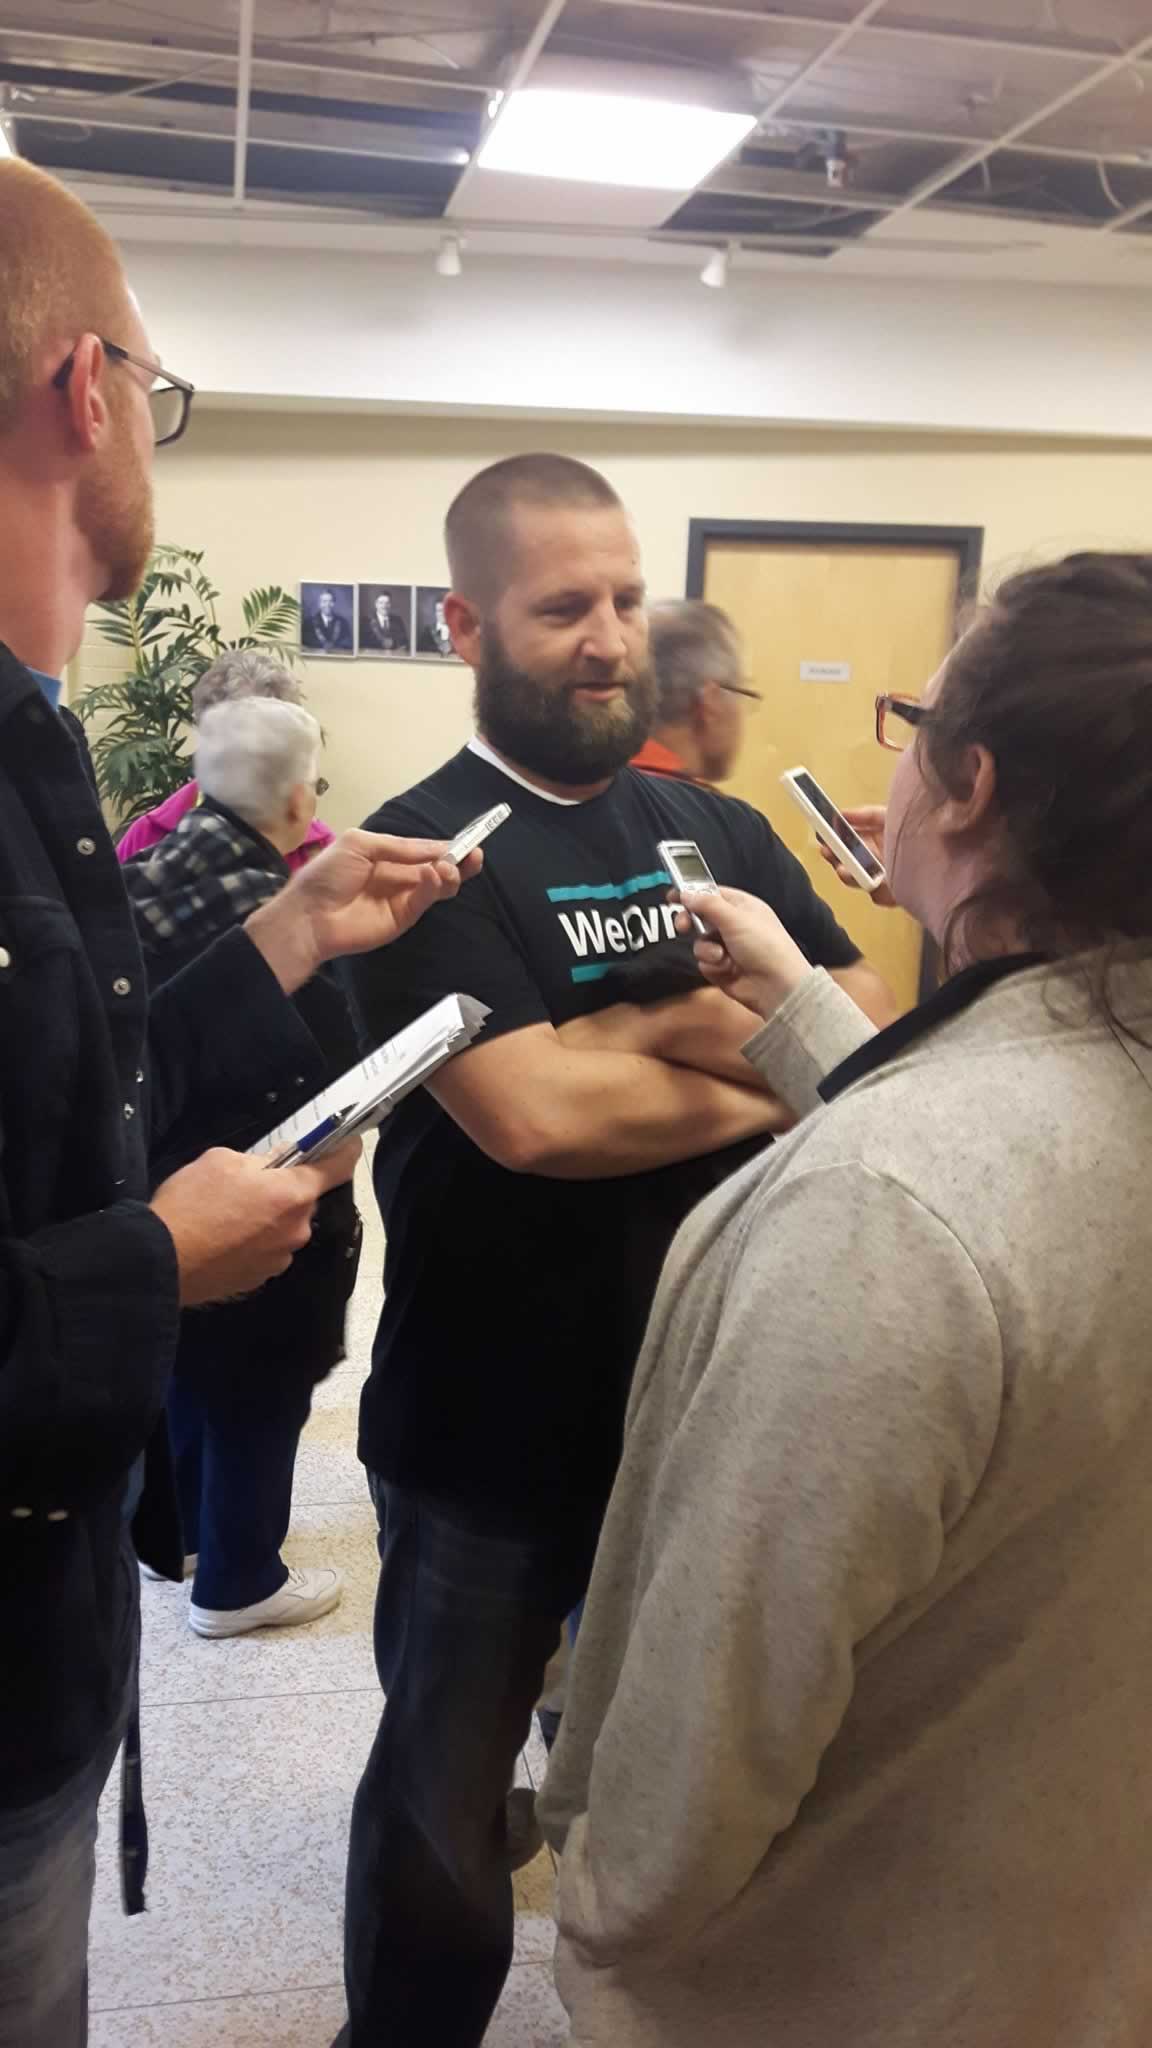 OPSEU member wearing We Own It shirt talks to reporters about Save Grey Gables campaign